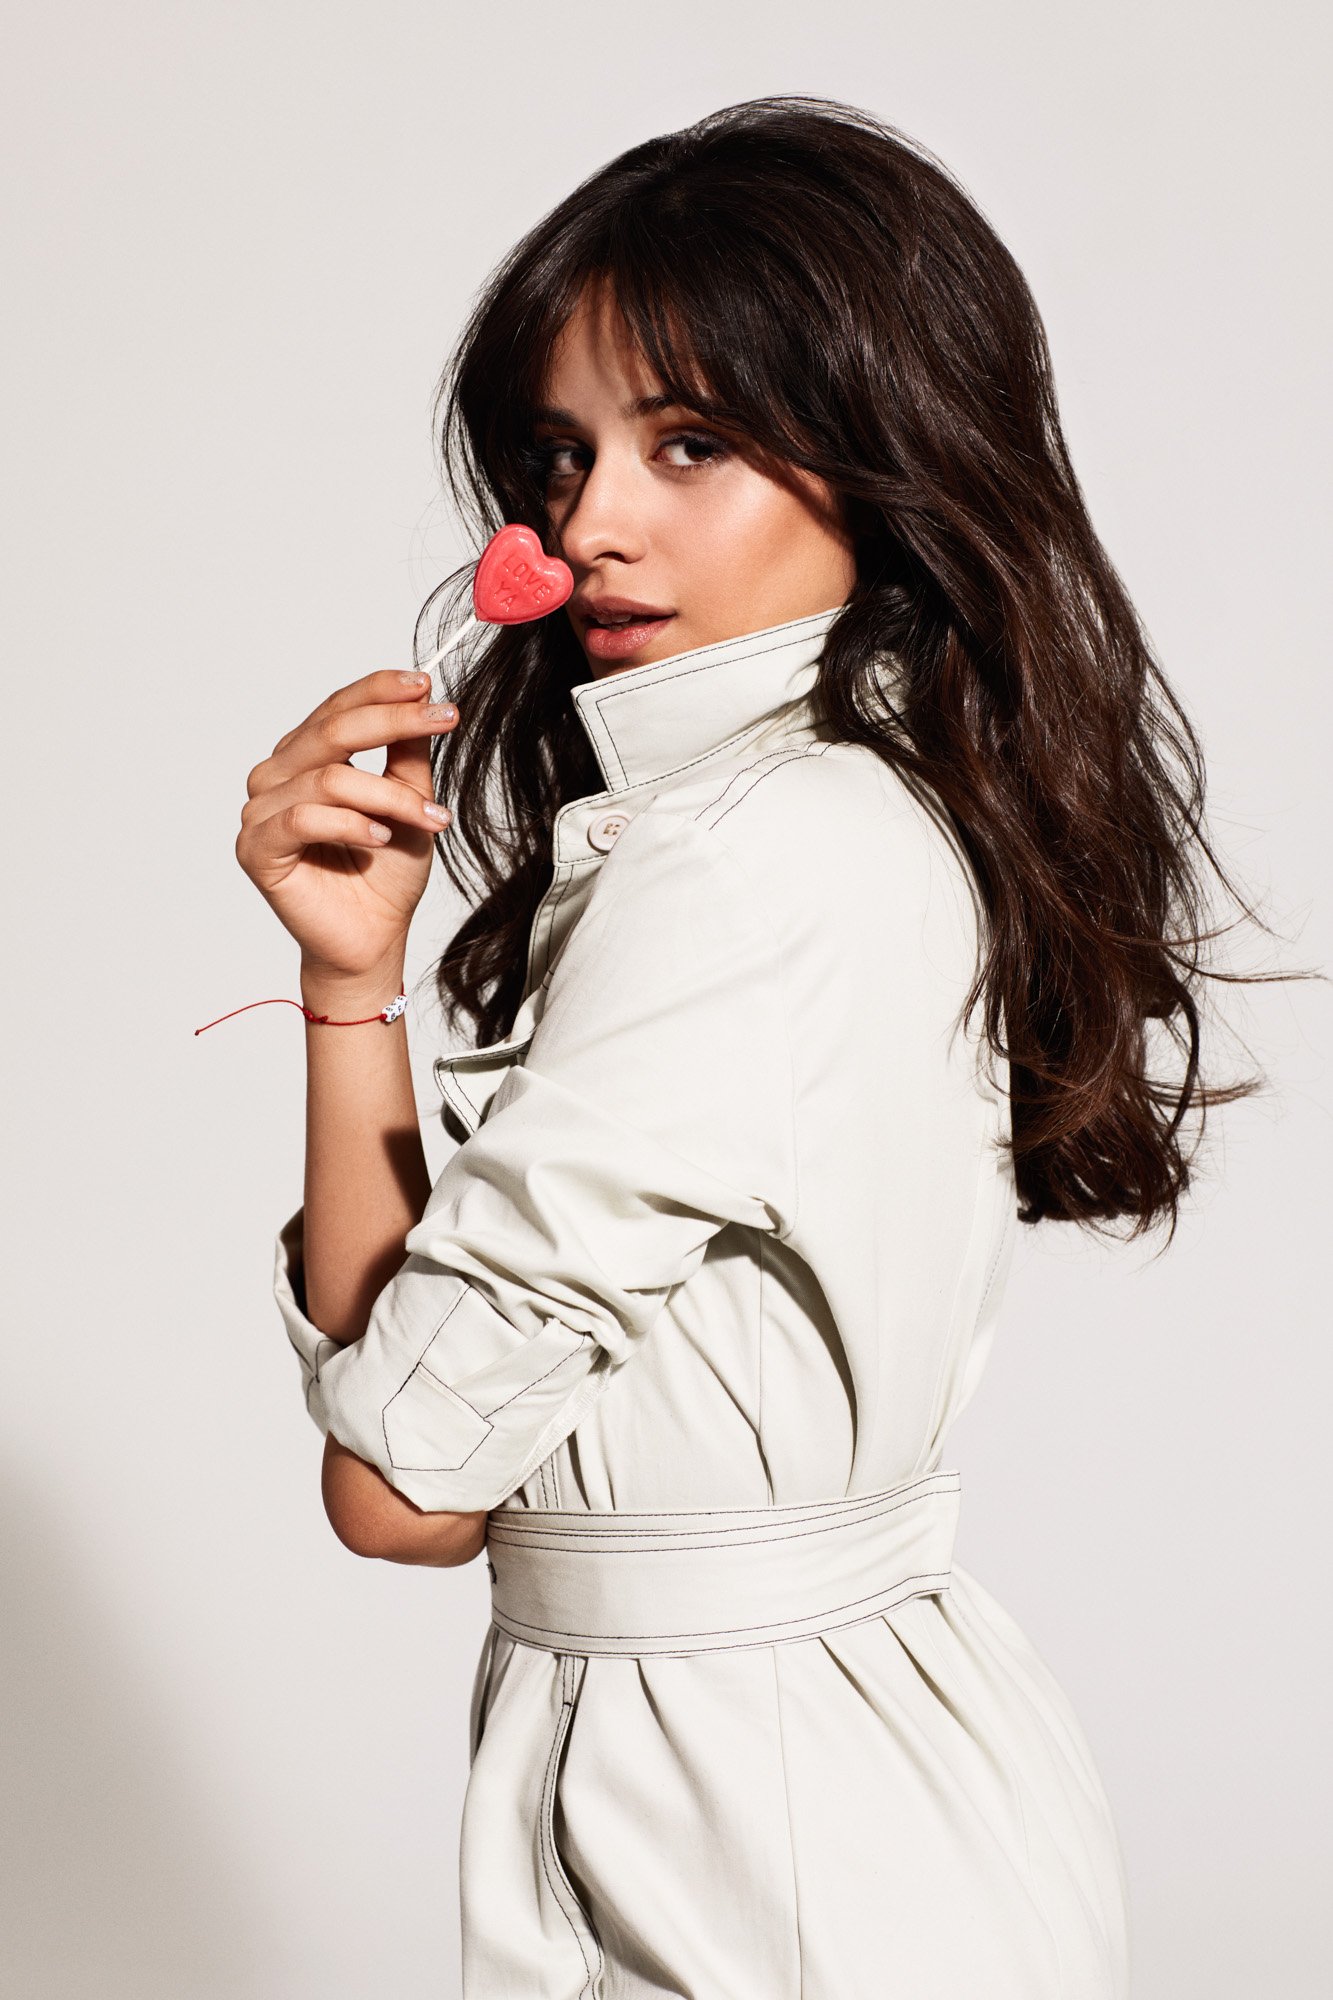 Camila Cabello with a lollipop because reasons